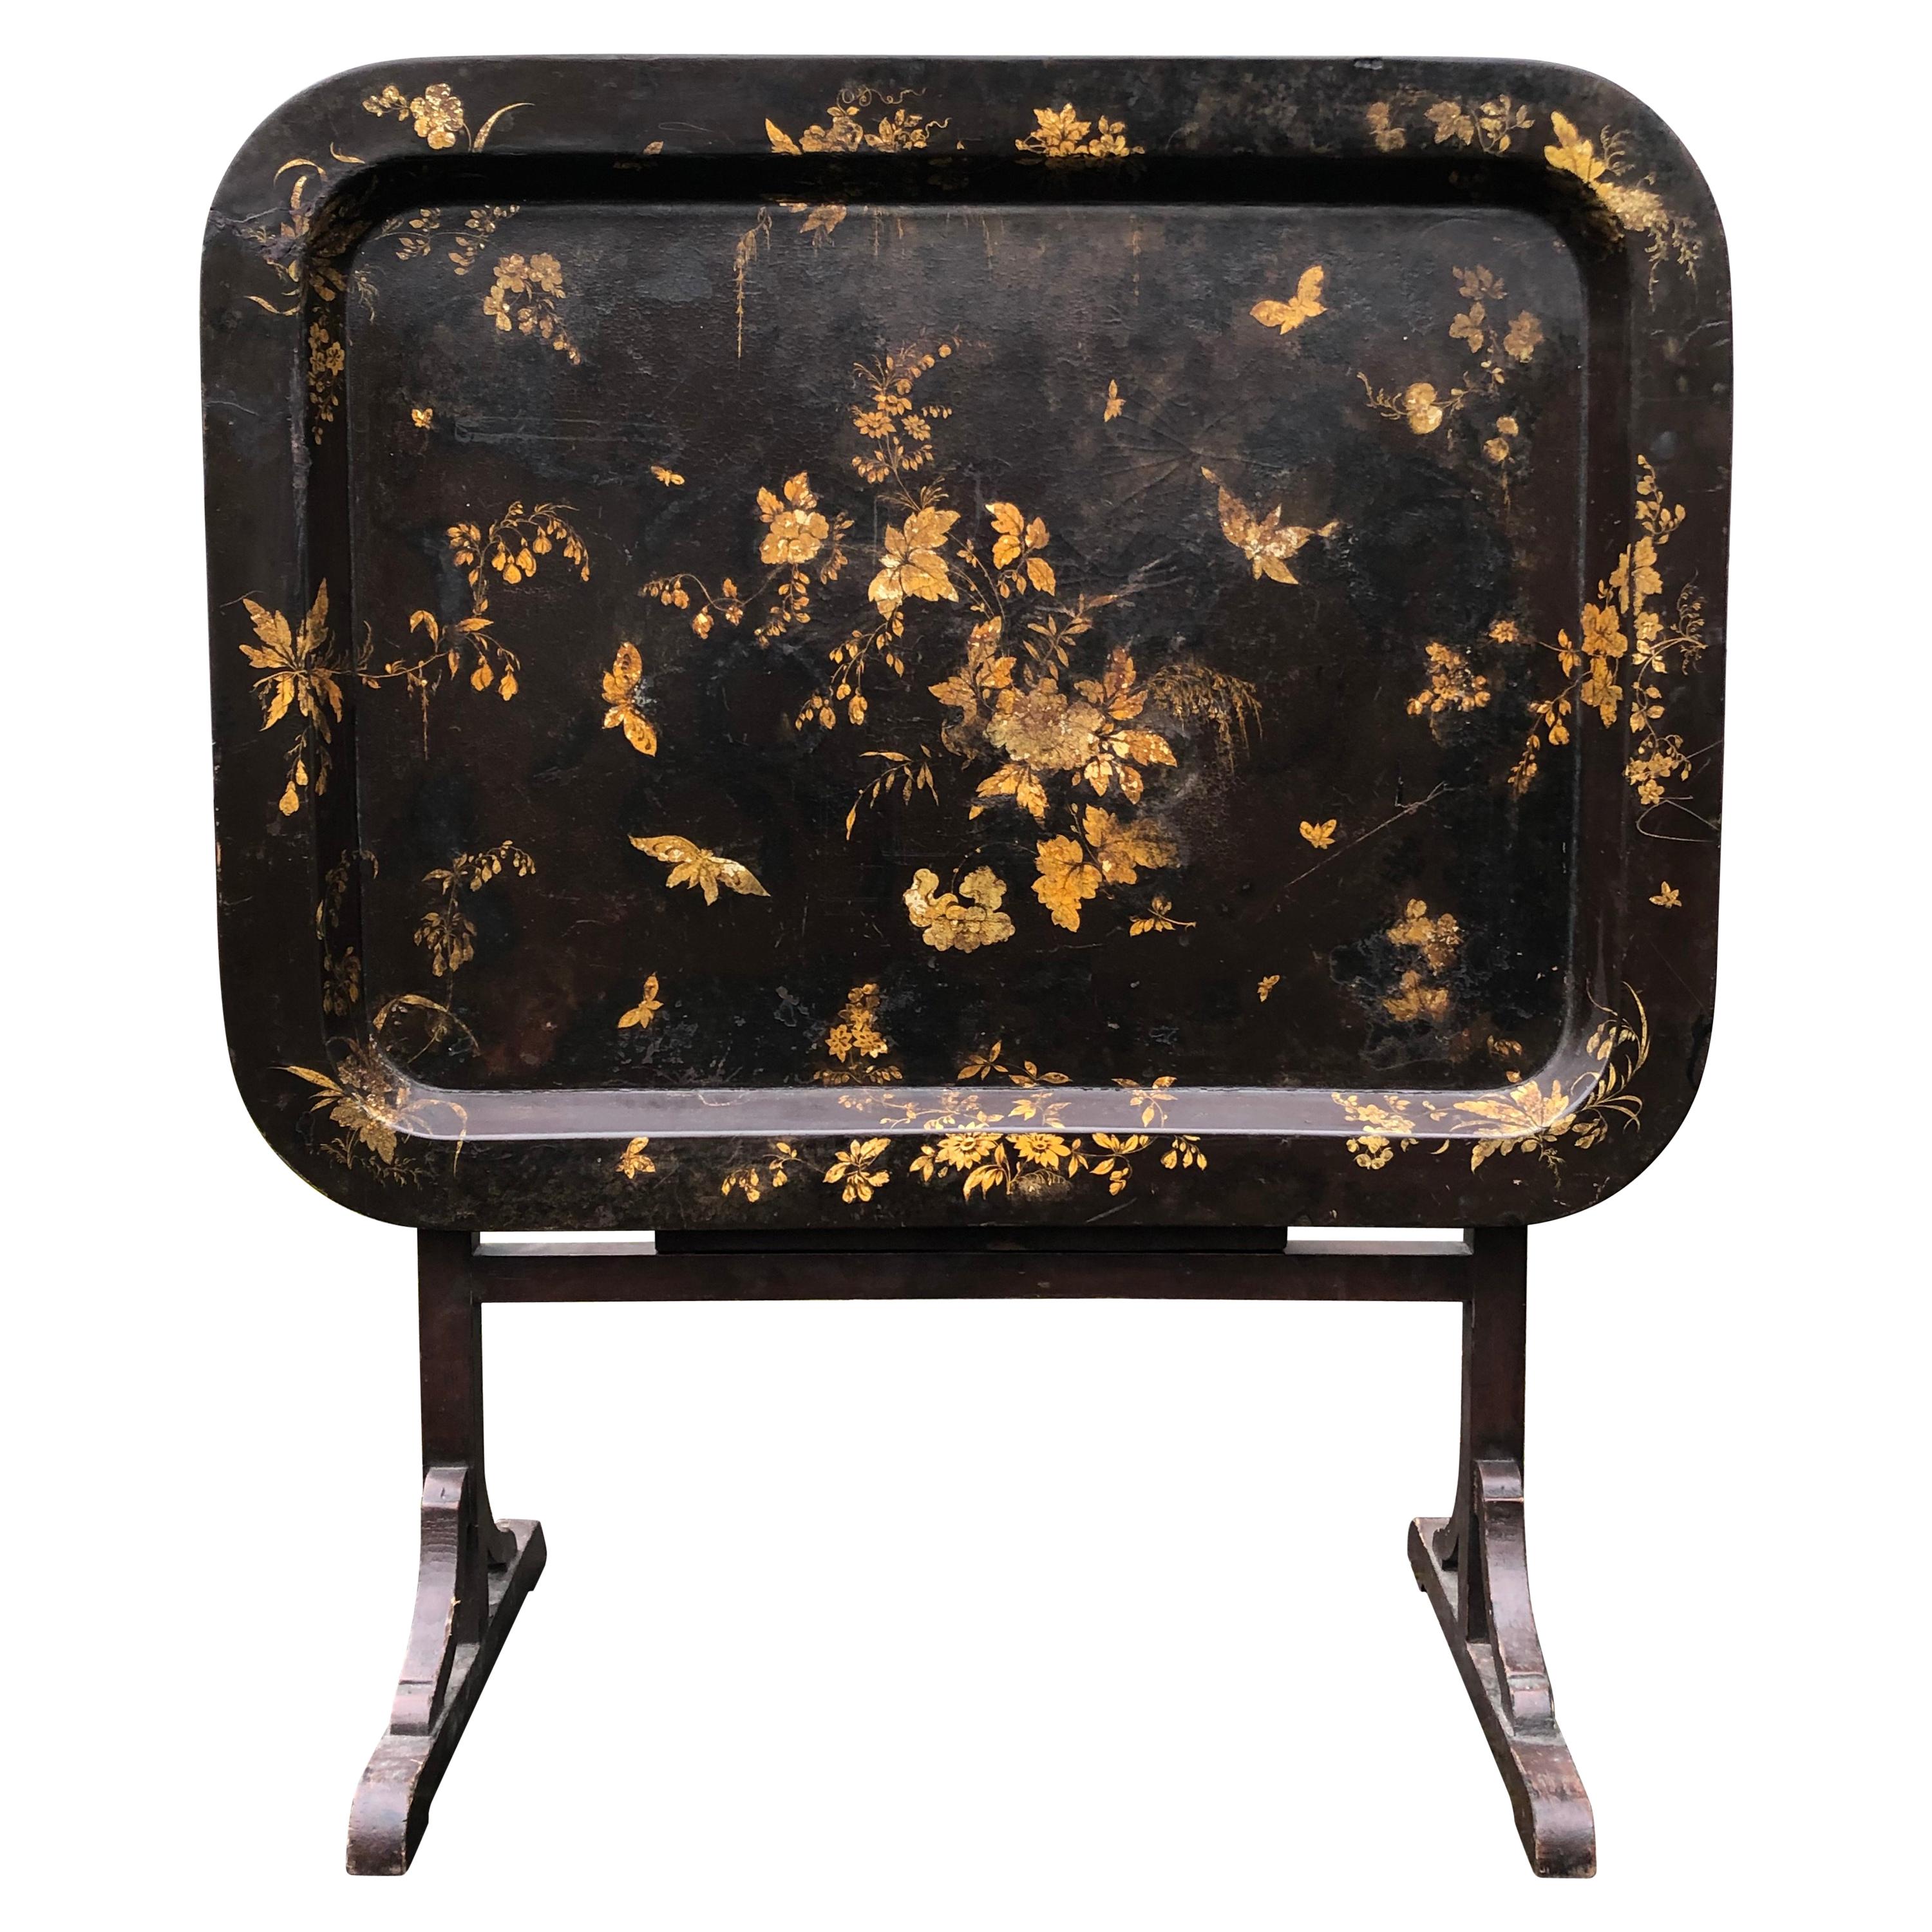 English Regency Style Gilt Papier Mache Black Lacquer Tray Table, Stand For Sale